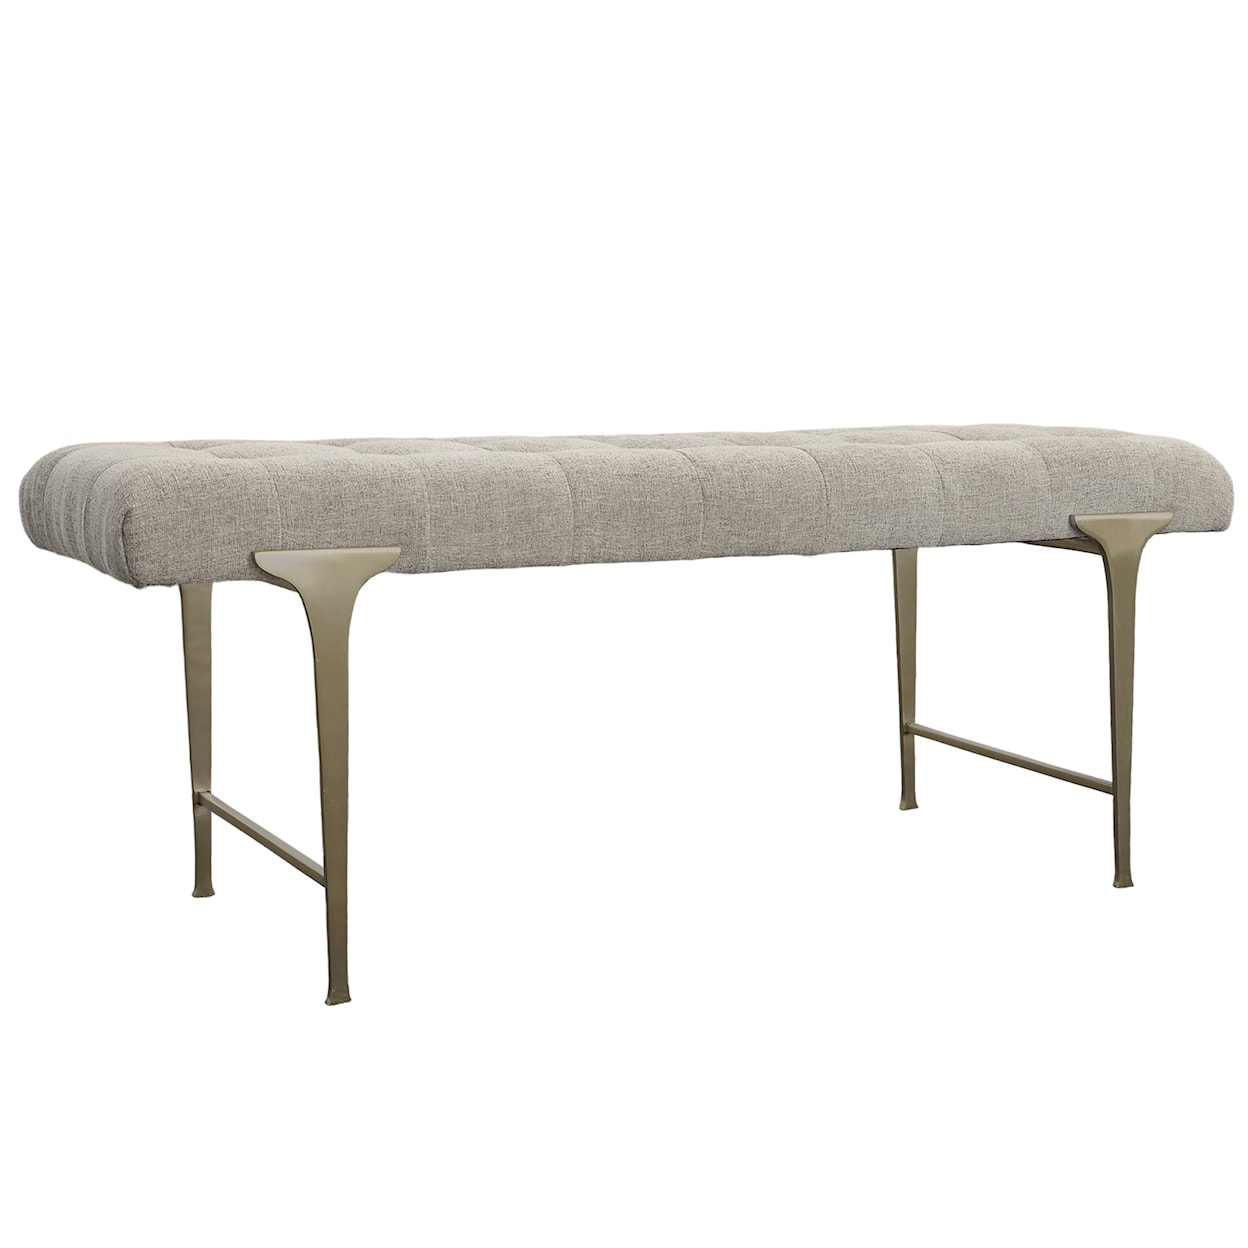 Uttermost Imperial Imperial Upholstered Gray Bench